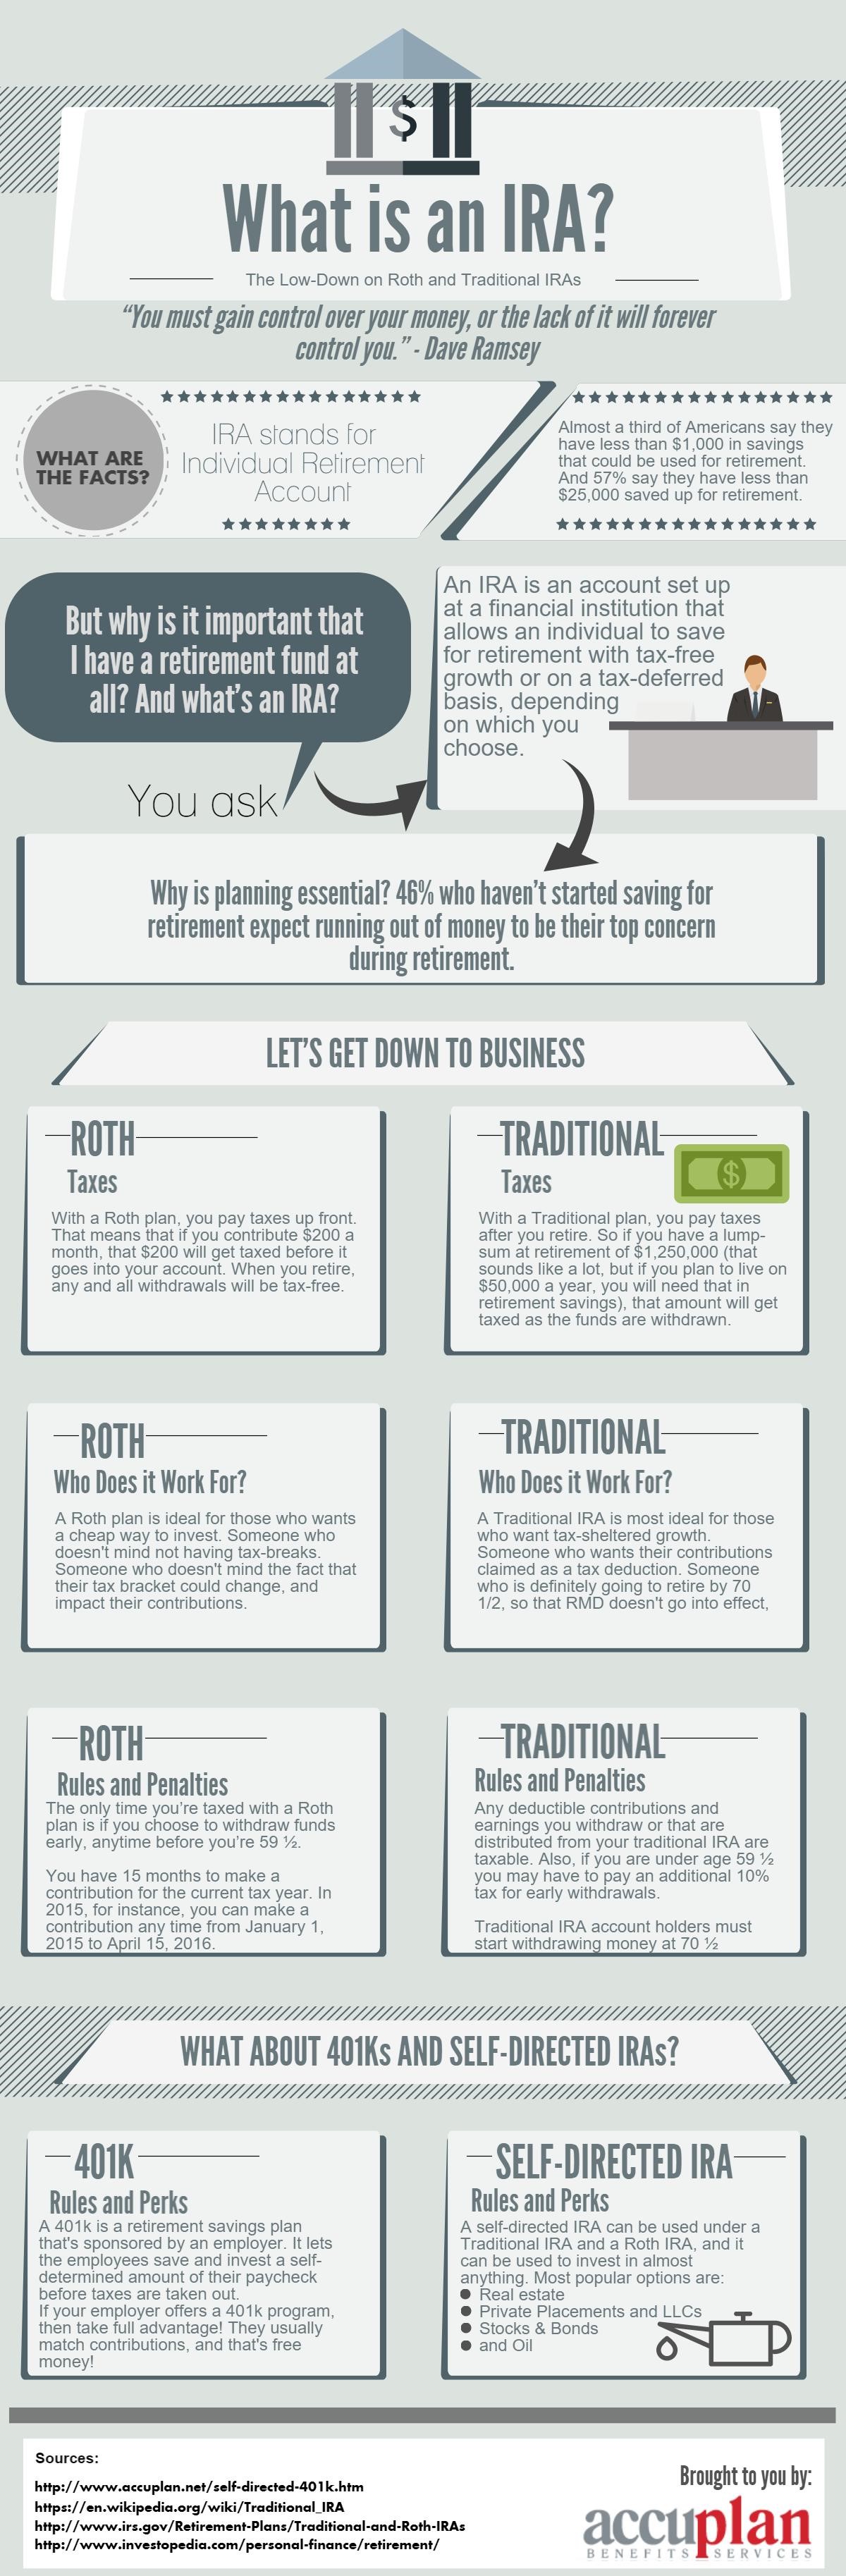 What is an IRA - Infographic